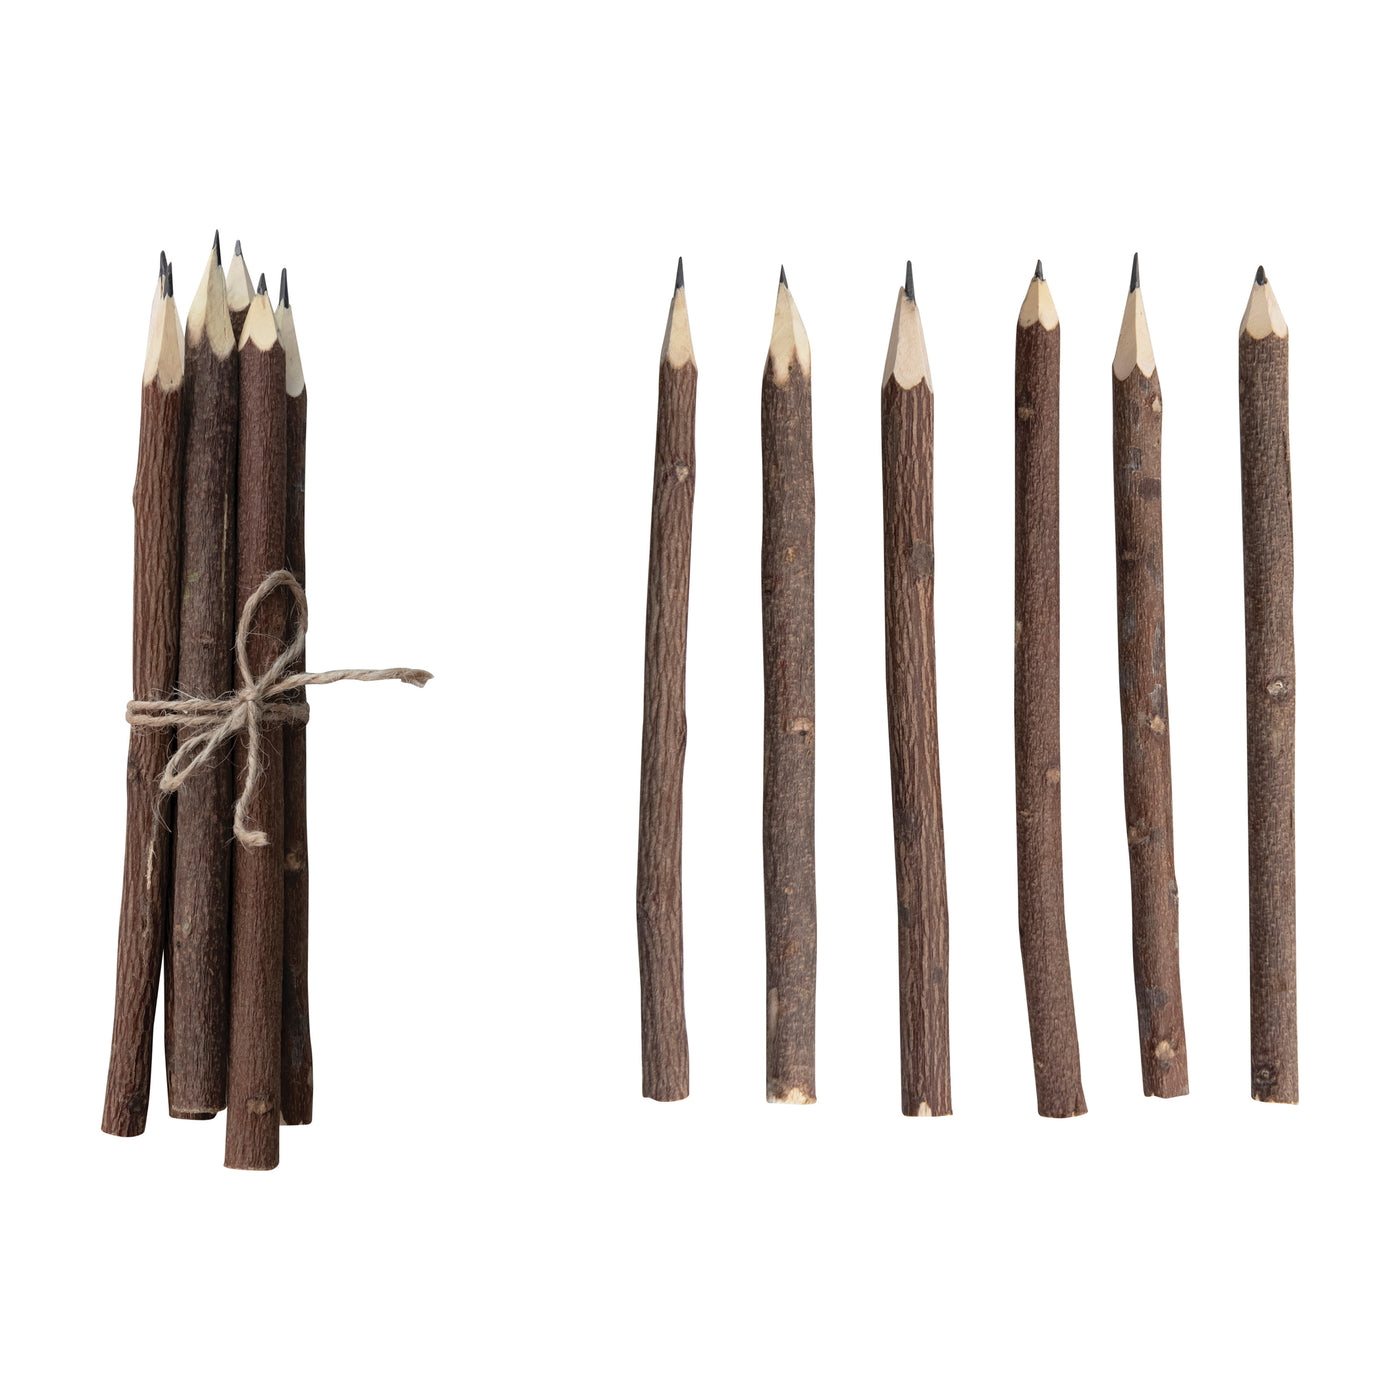 Hand-Carved Wood Pencils with Jute Tie, Set of 6